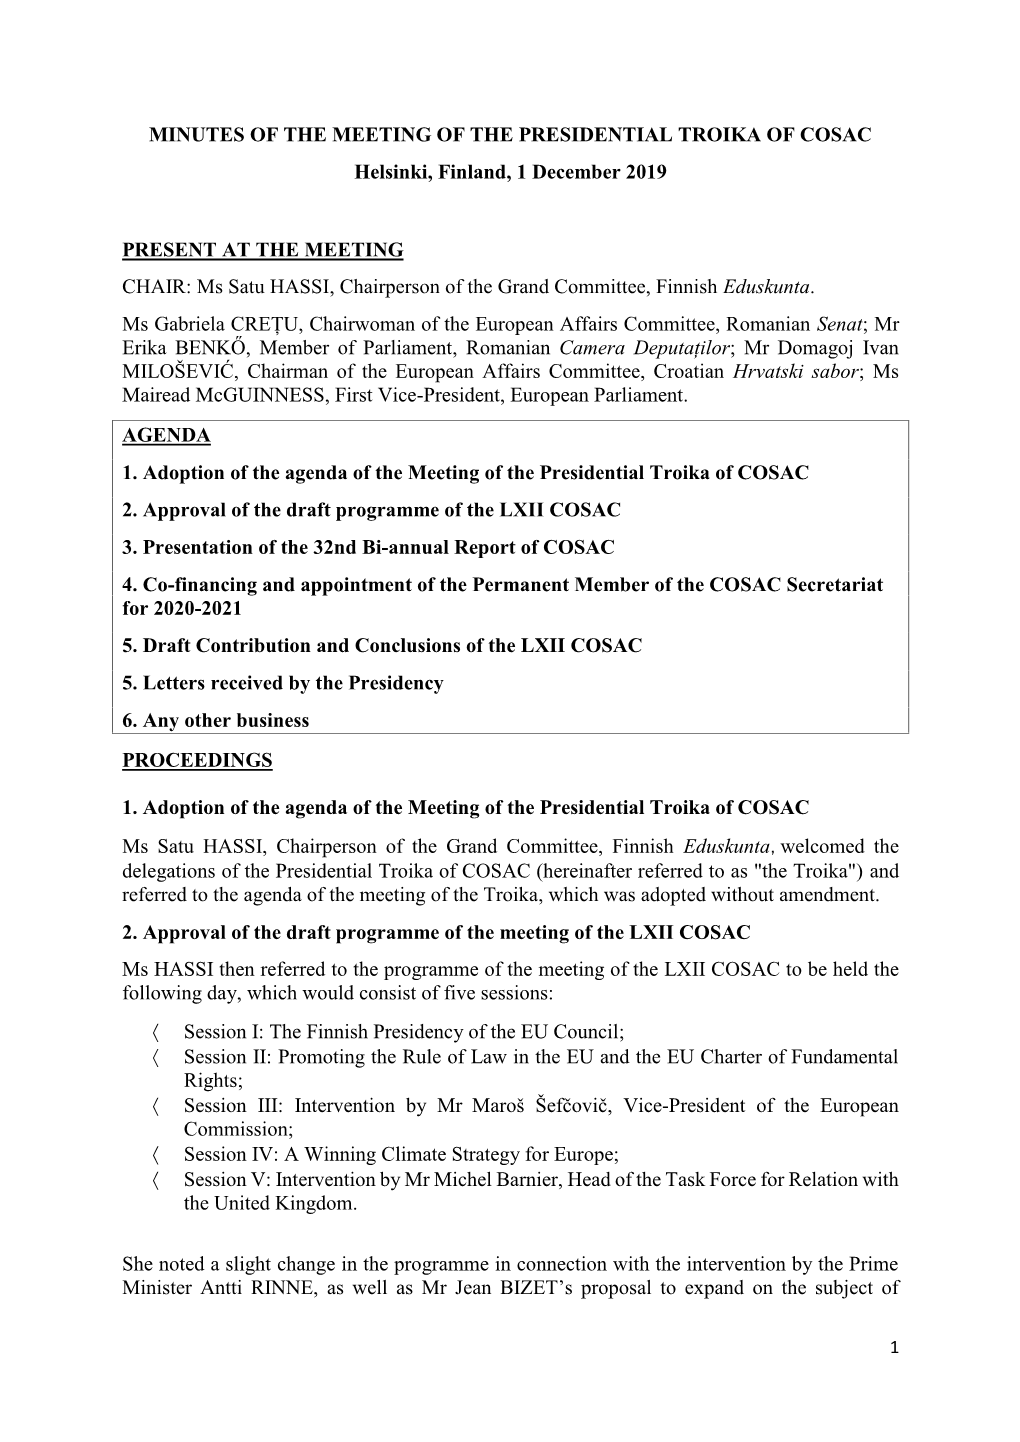 MINUTES of the MEETING of the PRESIDENTIAL TROIKA of COSAC Helsinki, Finland, 1 December 2019 PRESENT at the MEETING CHAIR: Ms S